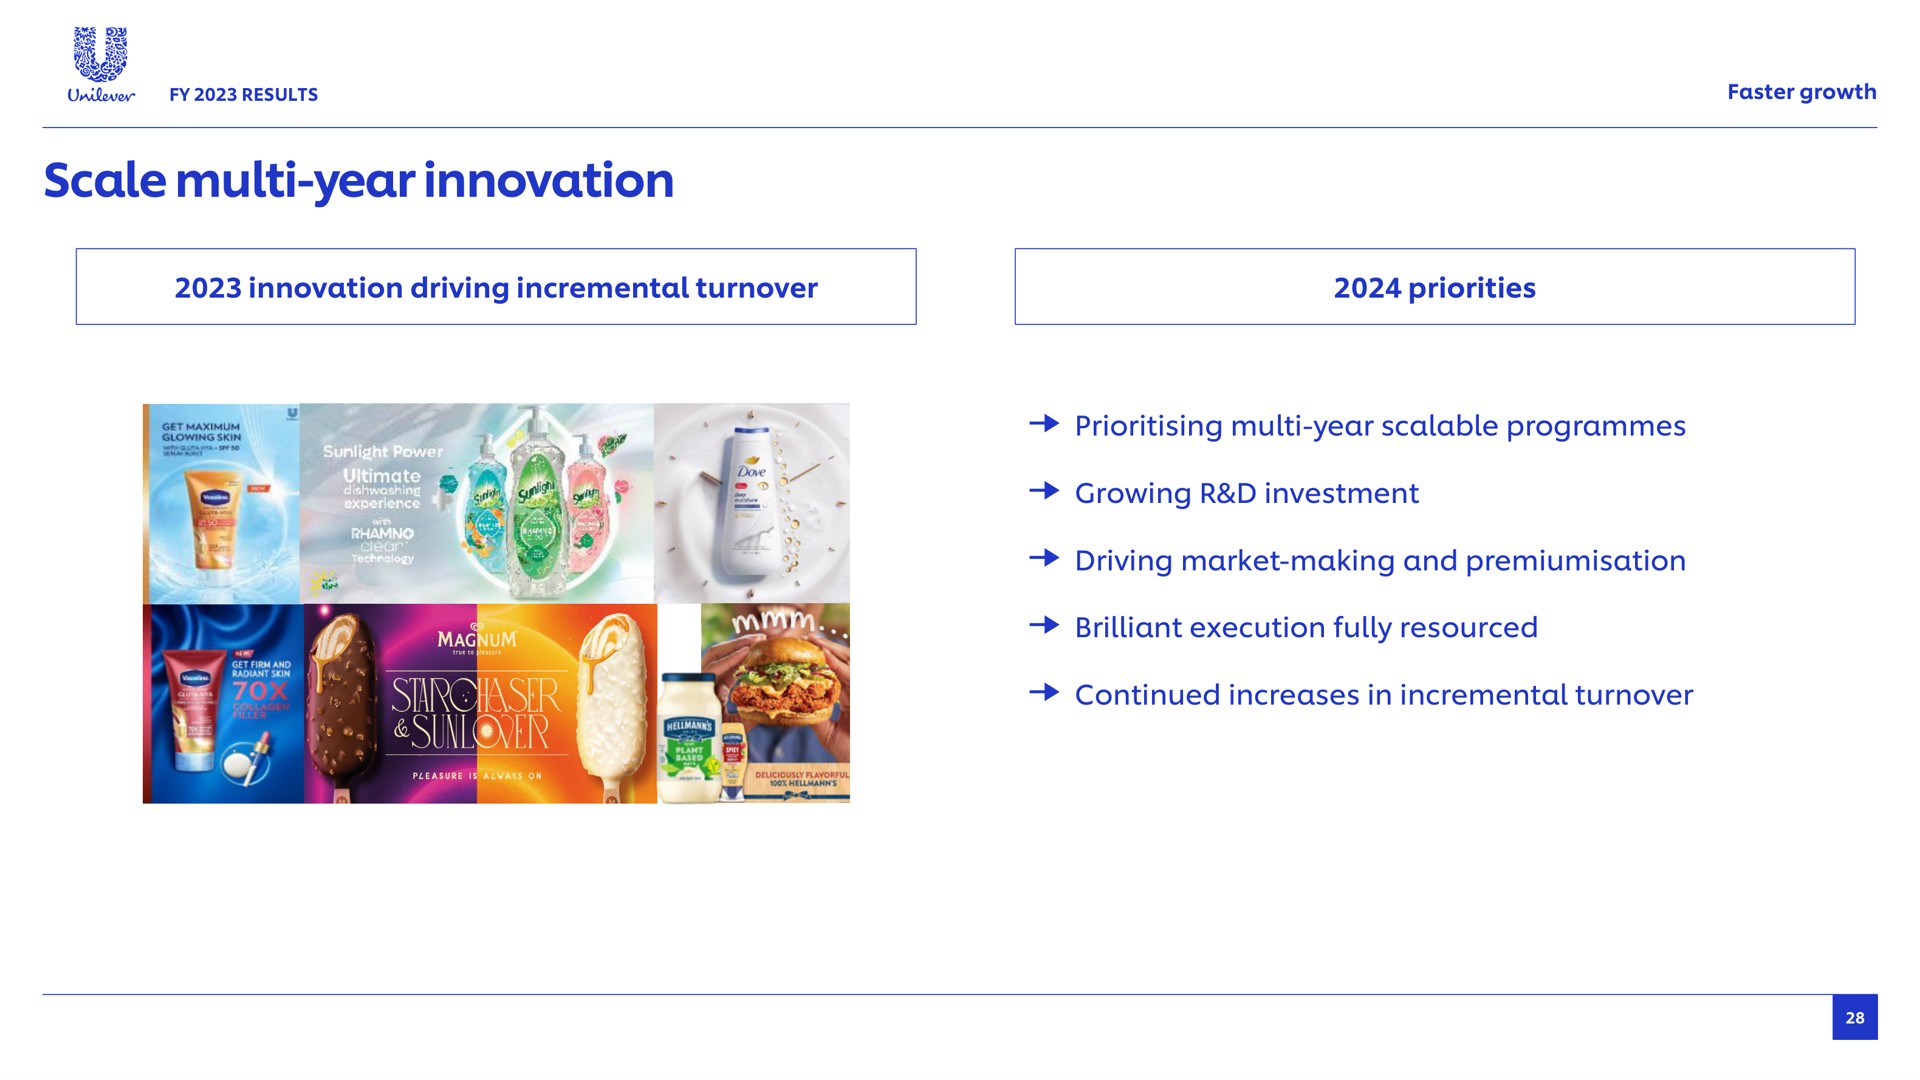 scale year innovation results faster growth driving incremental turnover priorities scalable programmes growing investment driving market making and brilliant execution fully continued increases in incremental turnover | Unilever